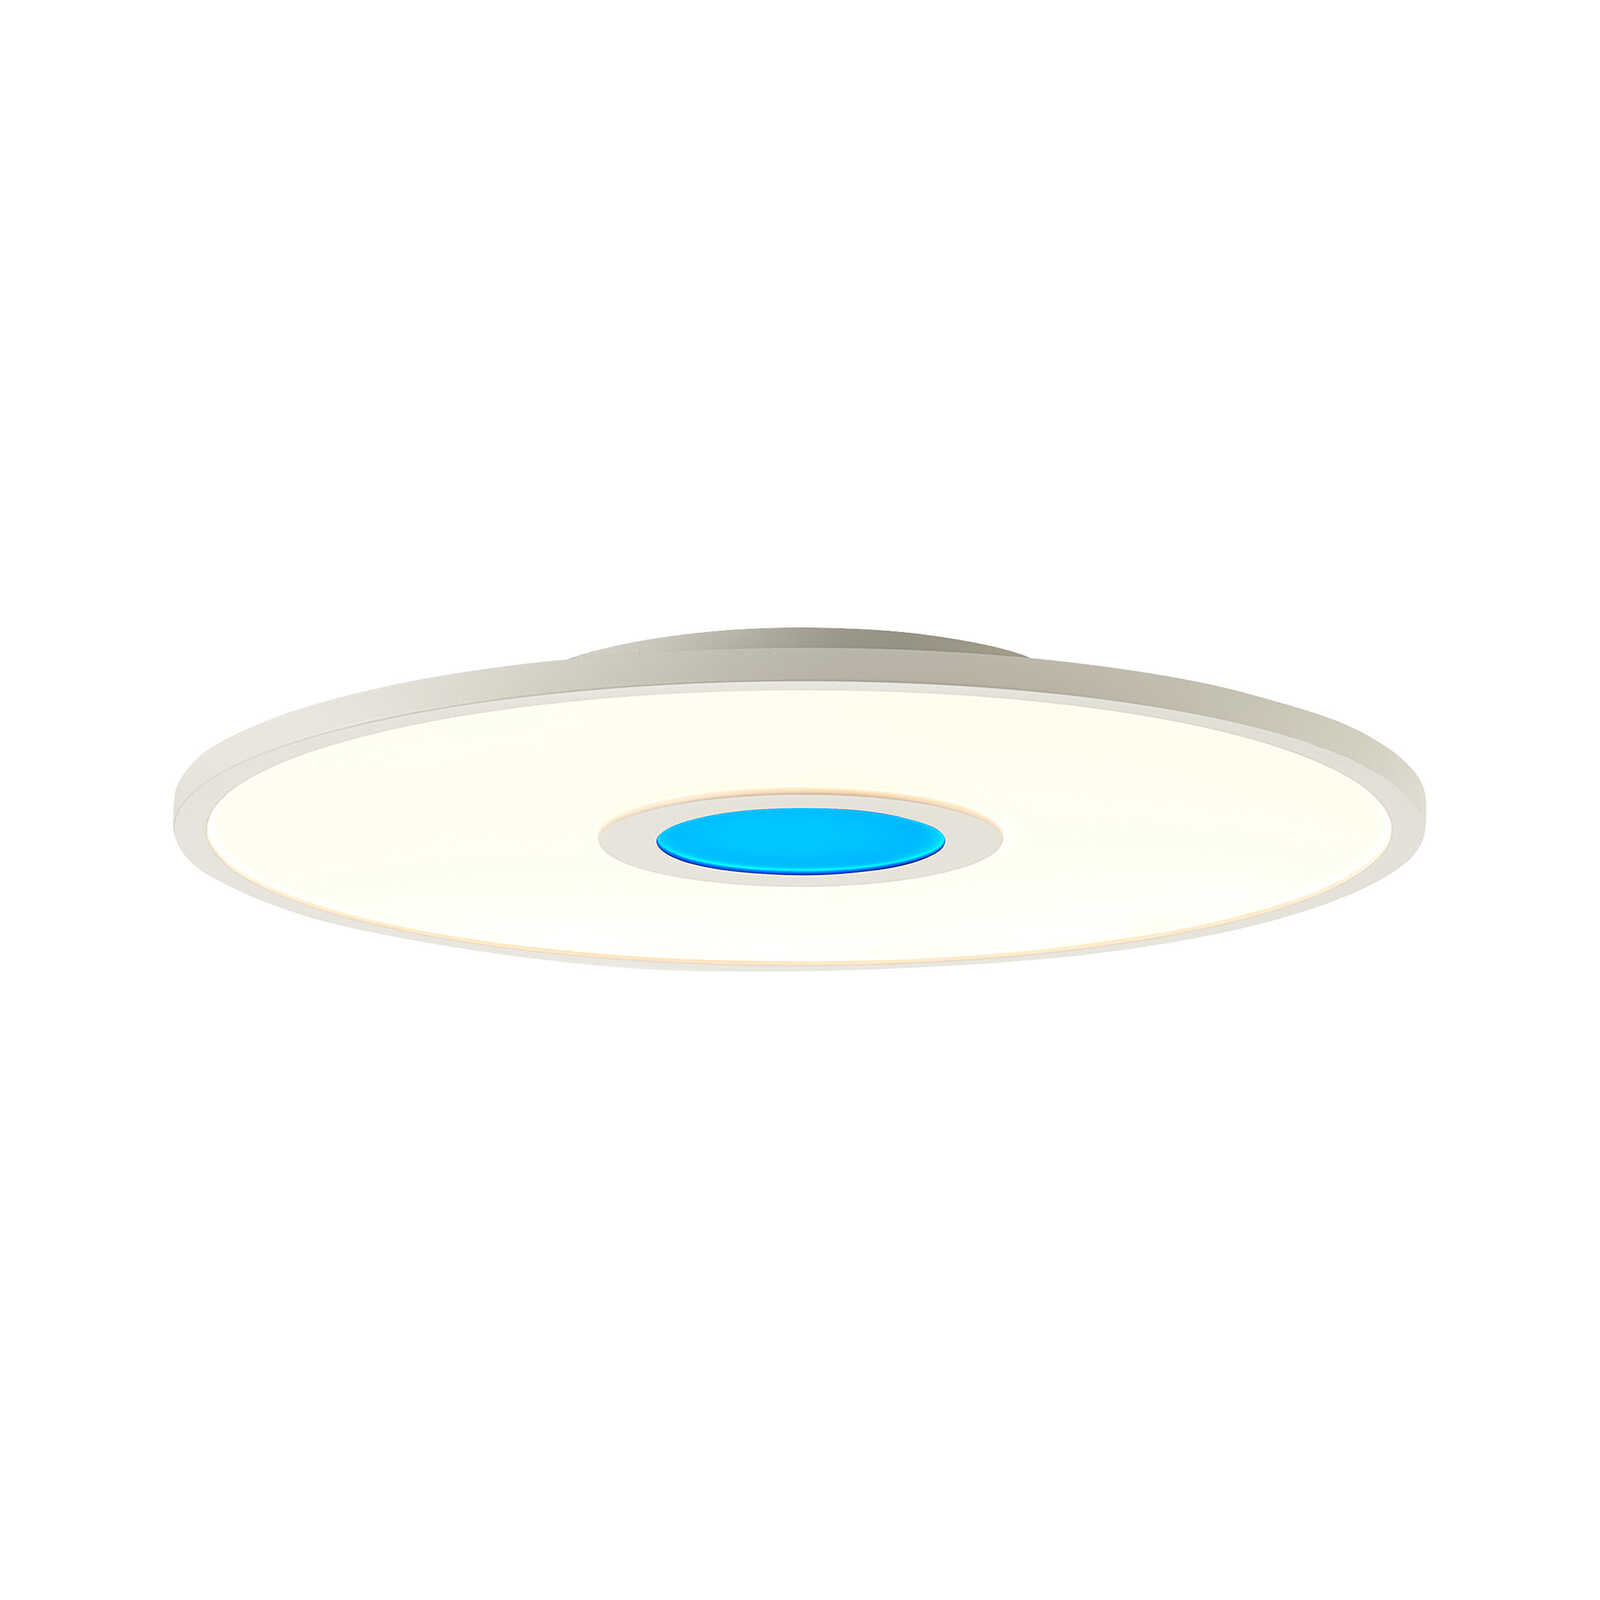 Metal ceiling light - Mads 1 - White
